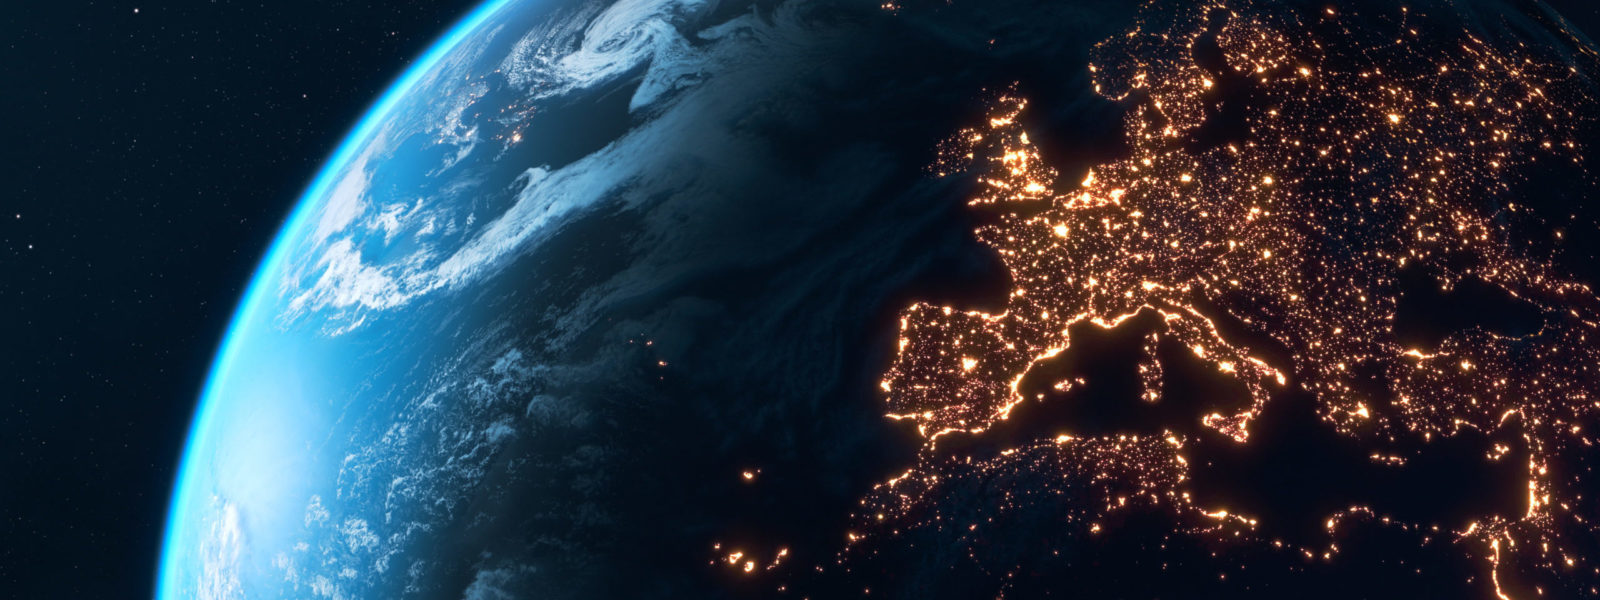 Planet Earth At Night – City Lights of Europe Glowing In The Dark